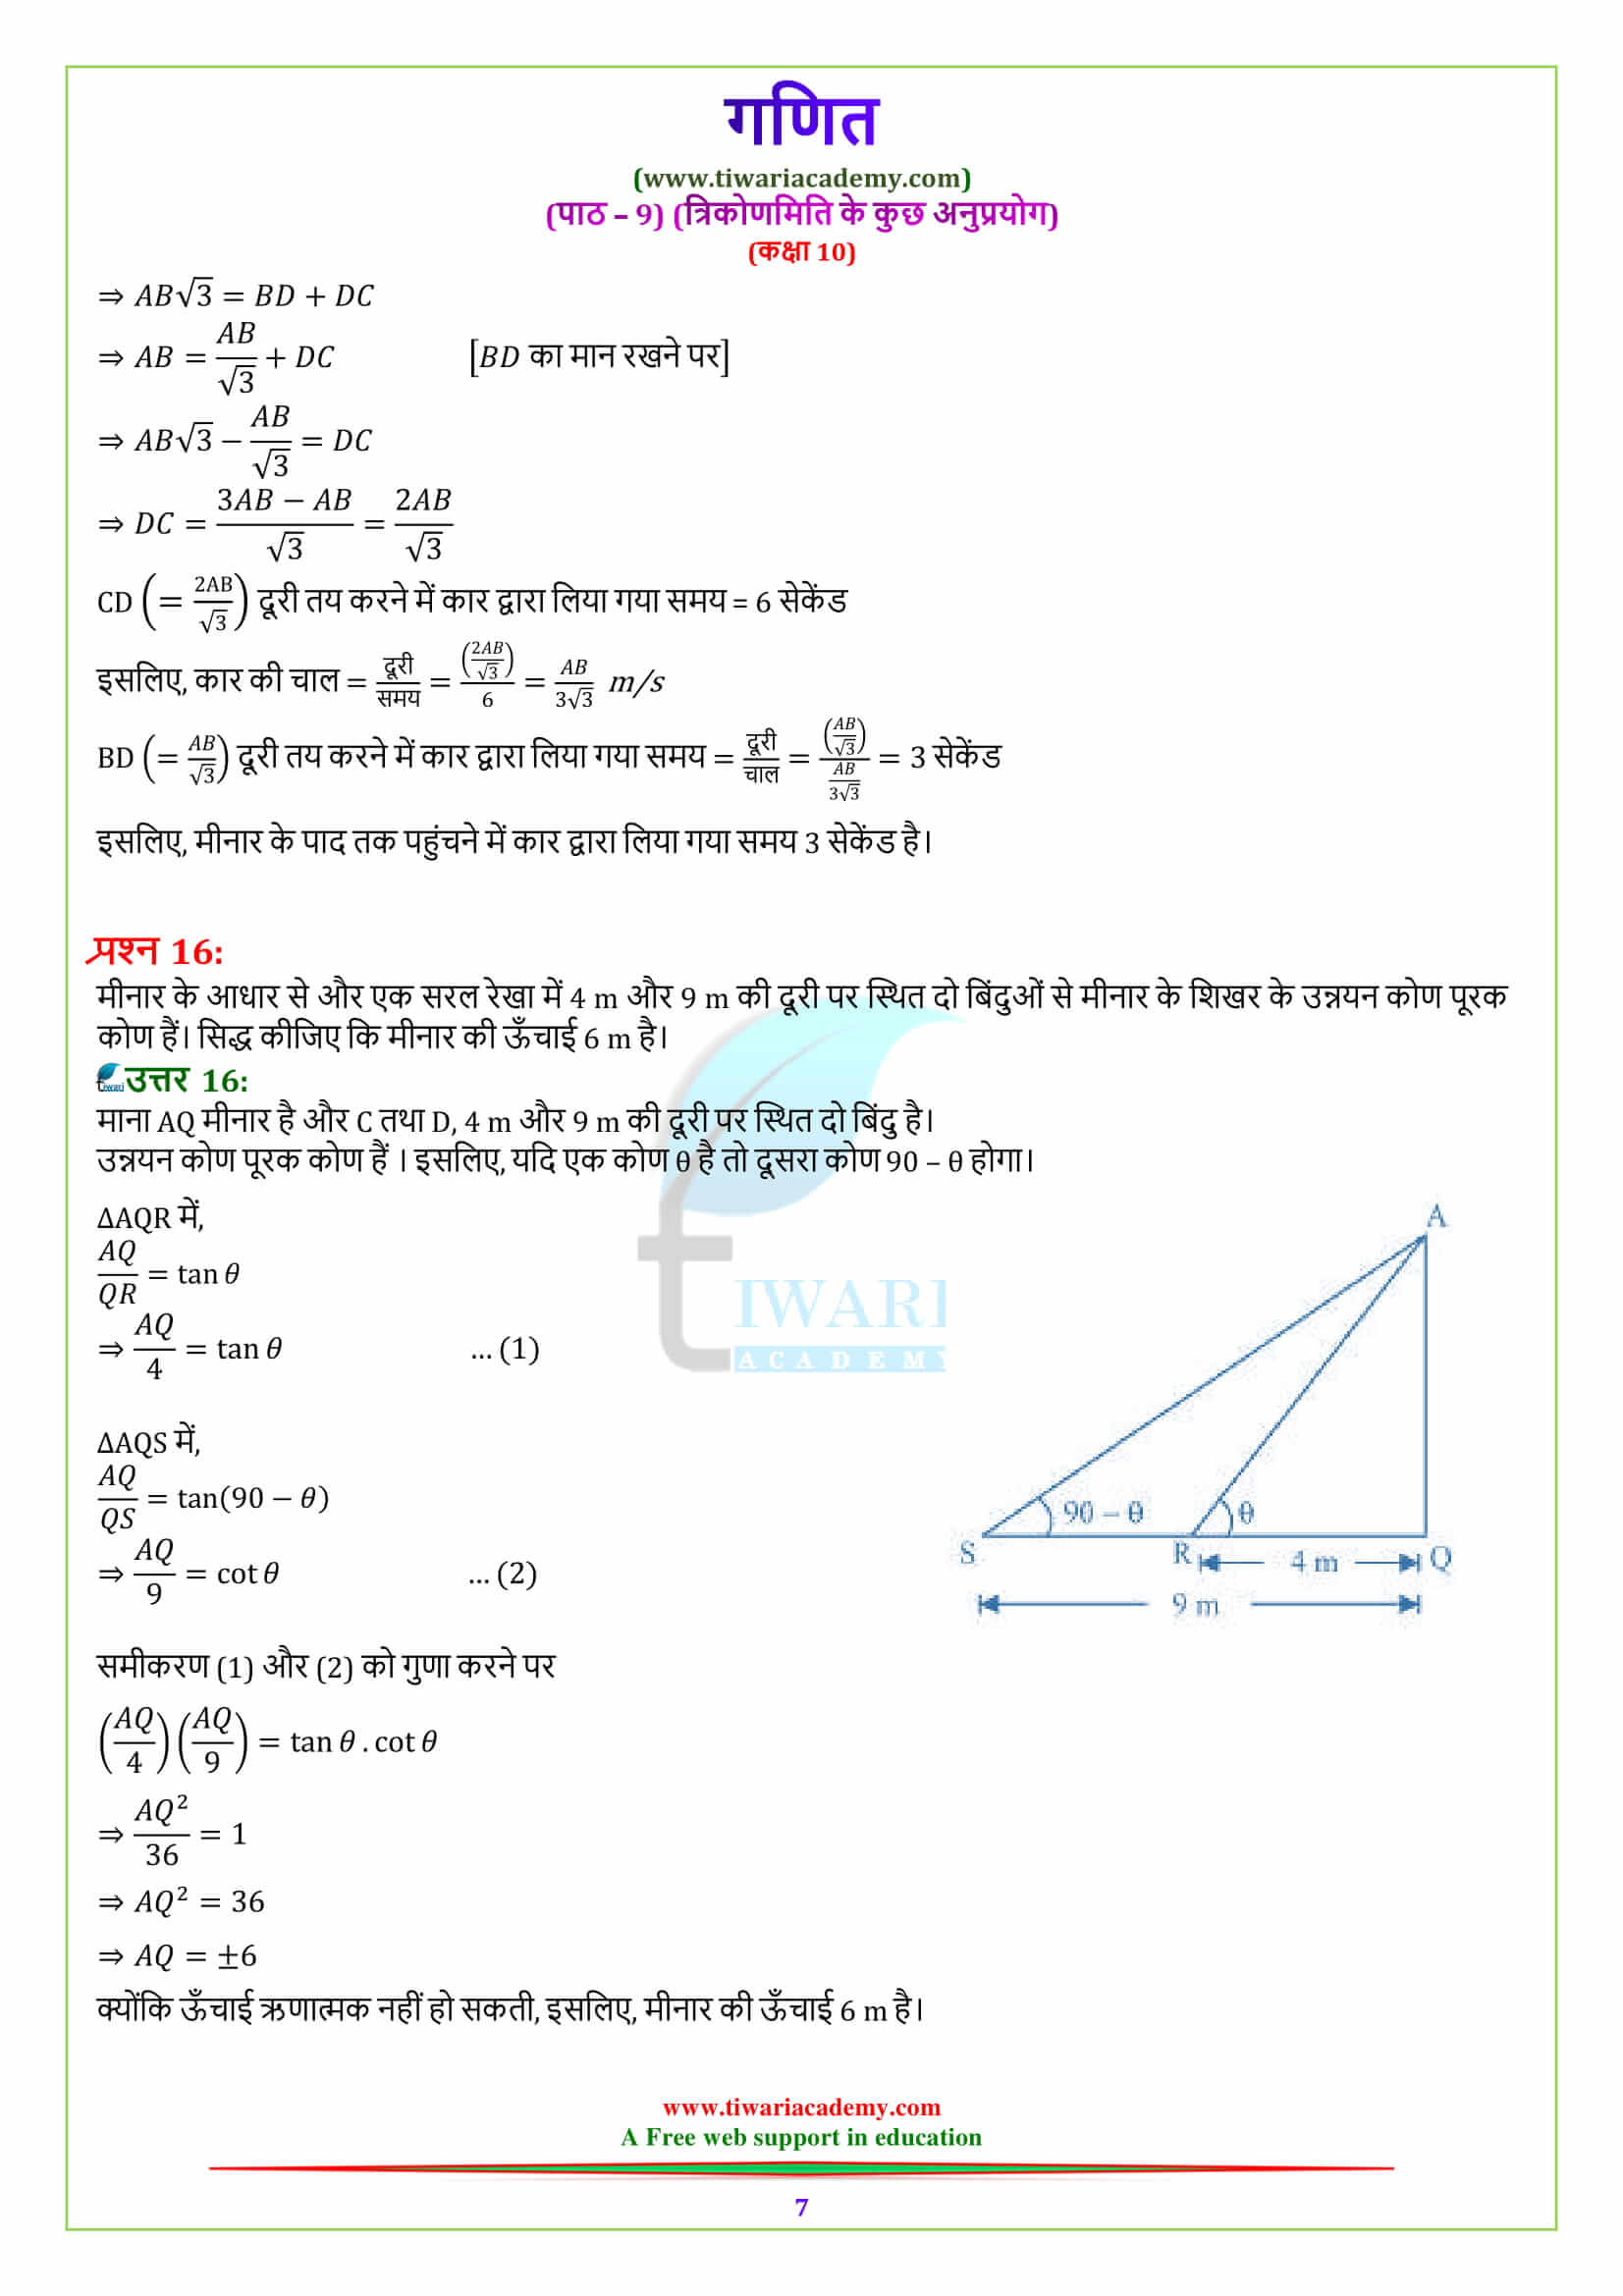 10 Maths Exercise 9.1 questions 12, 13, 14, 15, 16